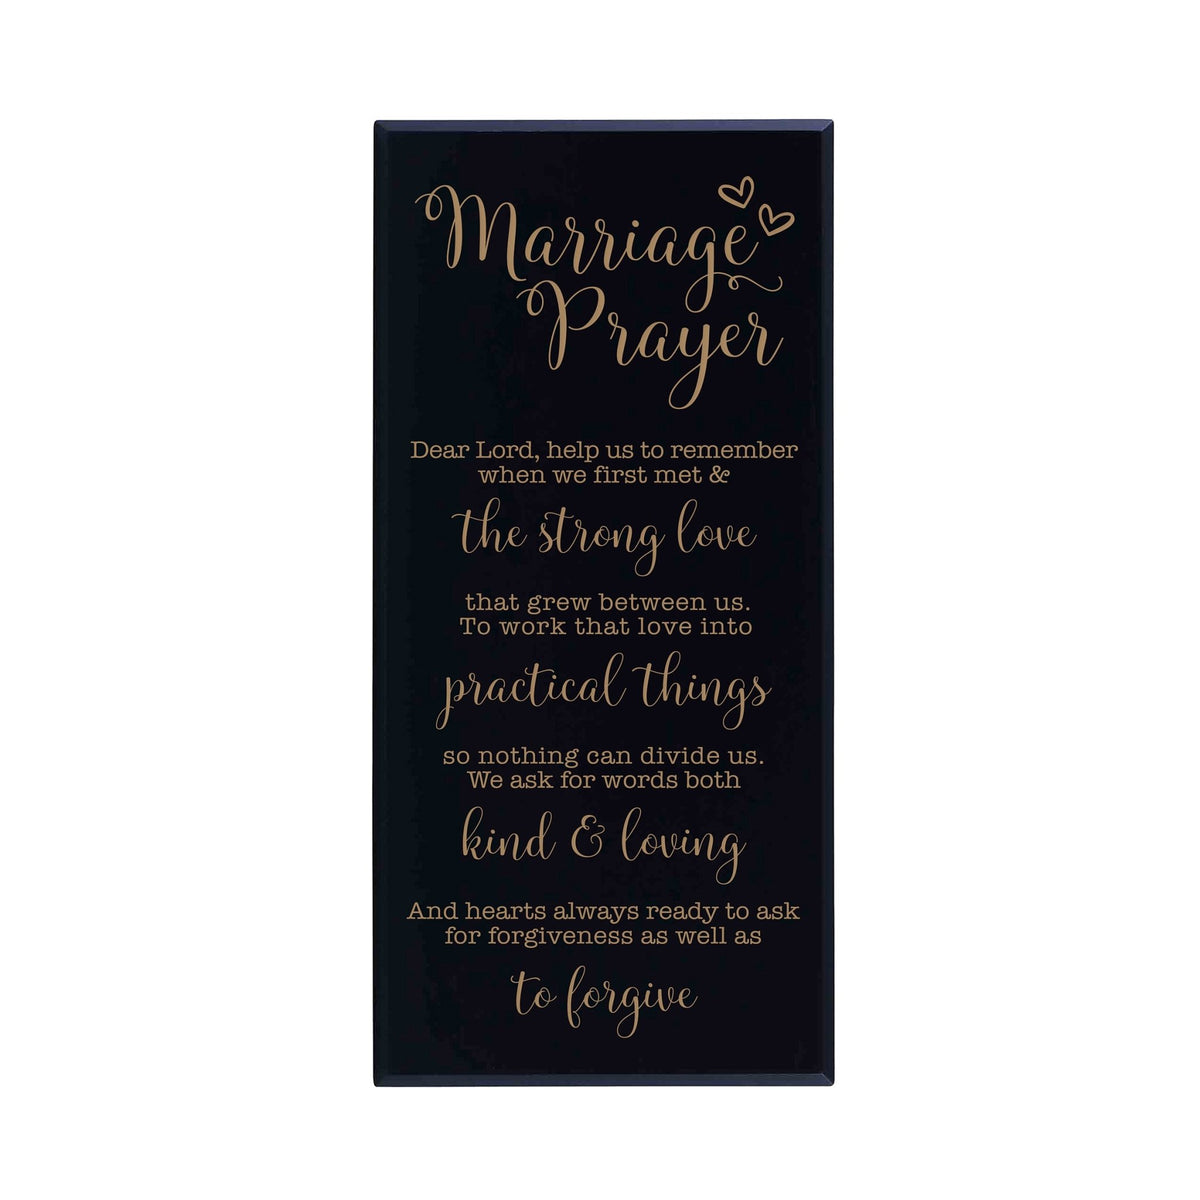 Inspiring Engraved Wedding Anniversary Wall Hanging Solid Wood Plaque 8x16 - Marriage Prayer - LifeSong Milestones